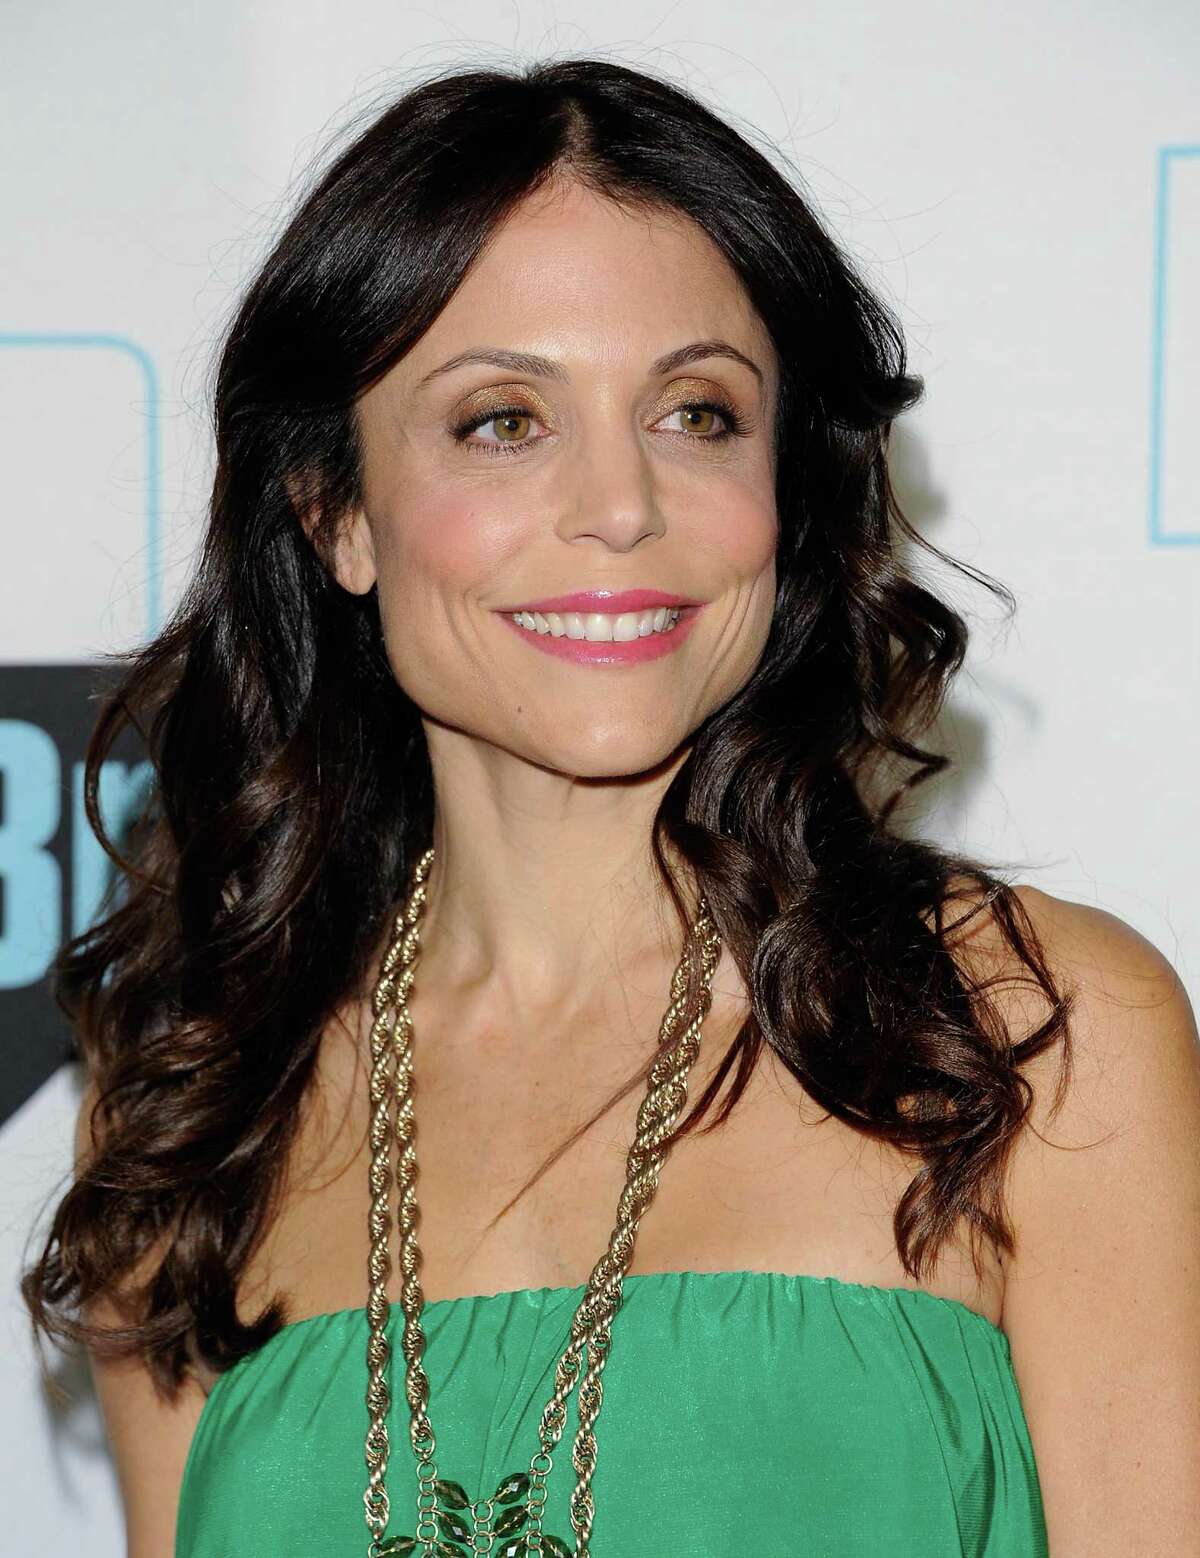 This April 4, 2012 file photo shows TV personality Bethenny Frankel at the Bravo network 2012 upfront presentation in New York.